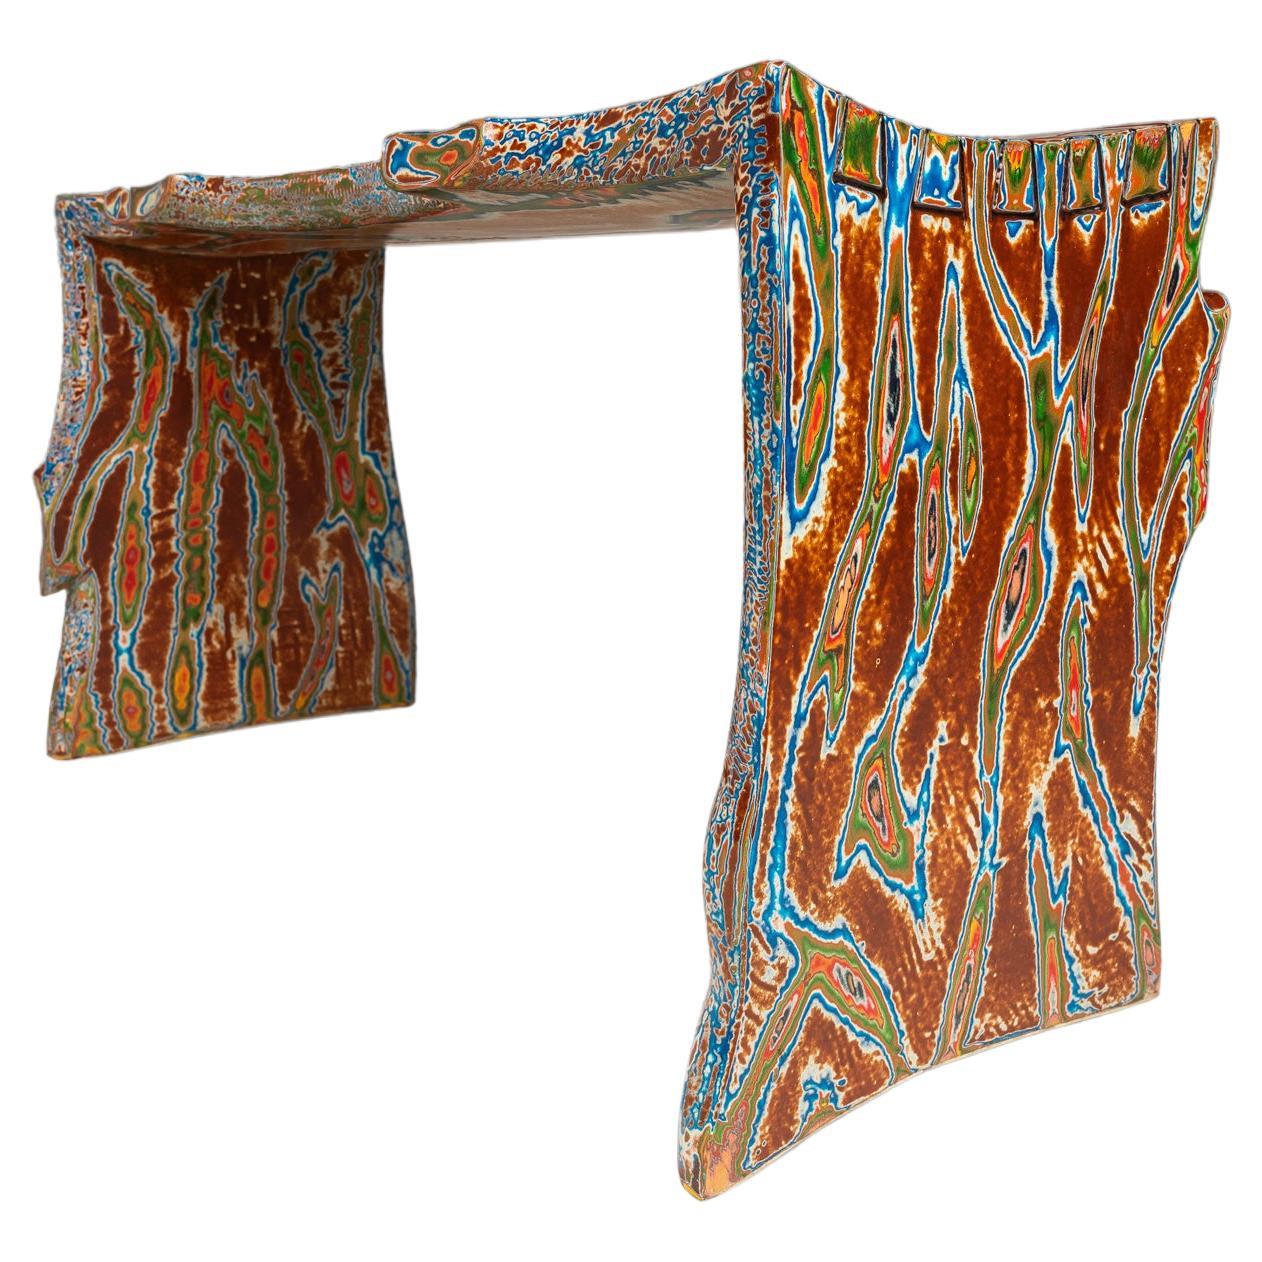 J. Dunklebarger Organic Modern Studio Craft Bentwood Asymmetrical Abstract Bench For Sale